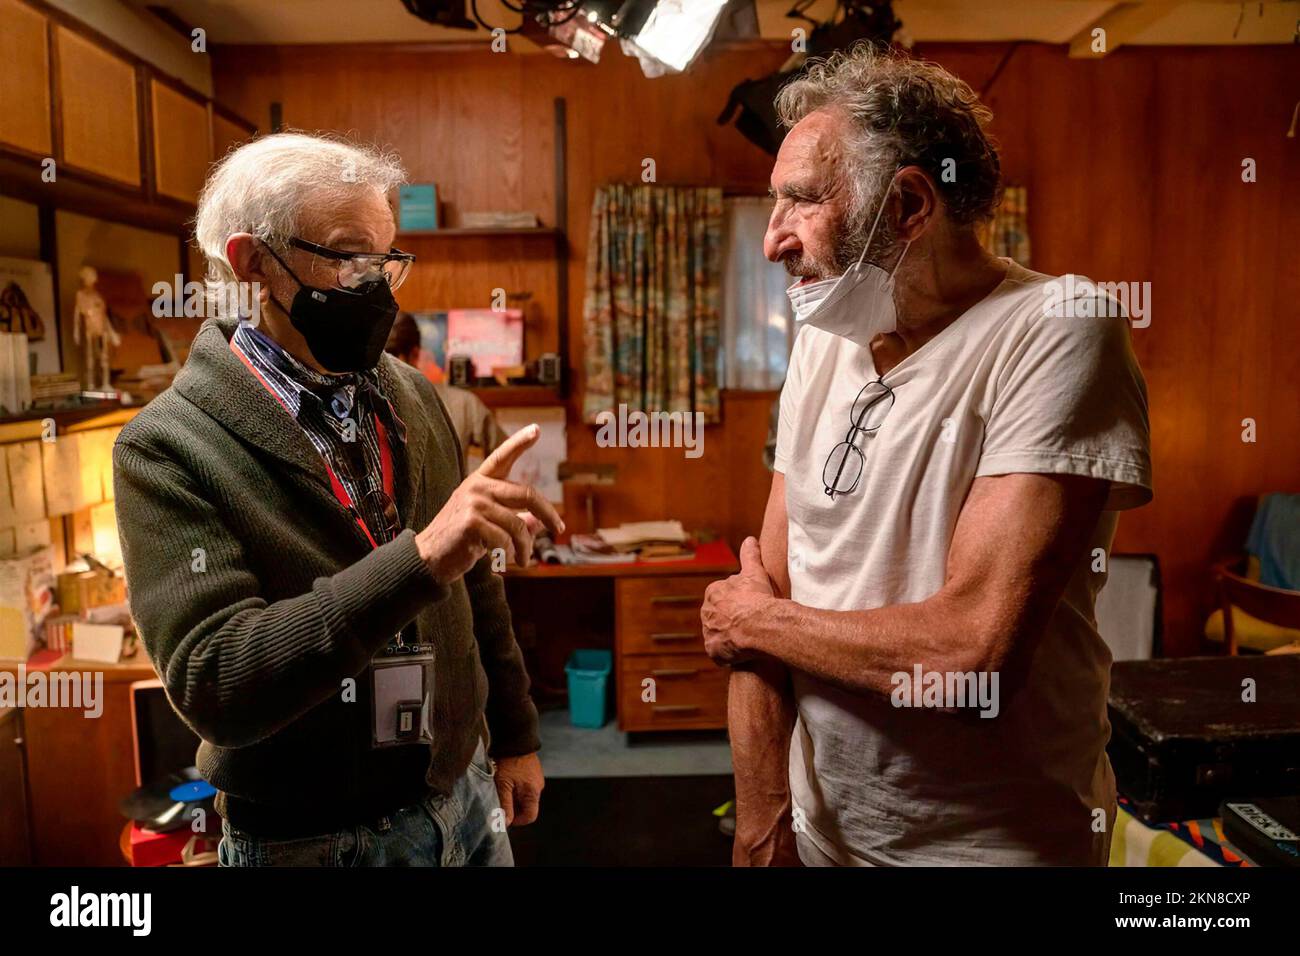 STEVEN SPIELBERG and JUDD HIRSCH in THE FABELMANS (2022), directed by STEVEN SPIELBERG. Credit: Universal Pictures / Amblin Partners / Album Stock Photo